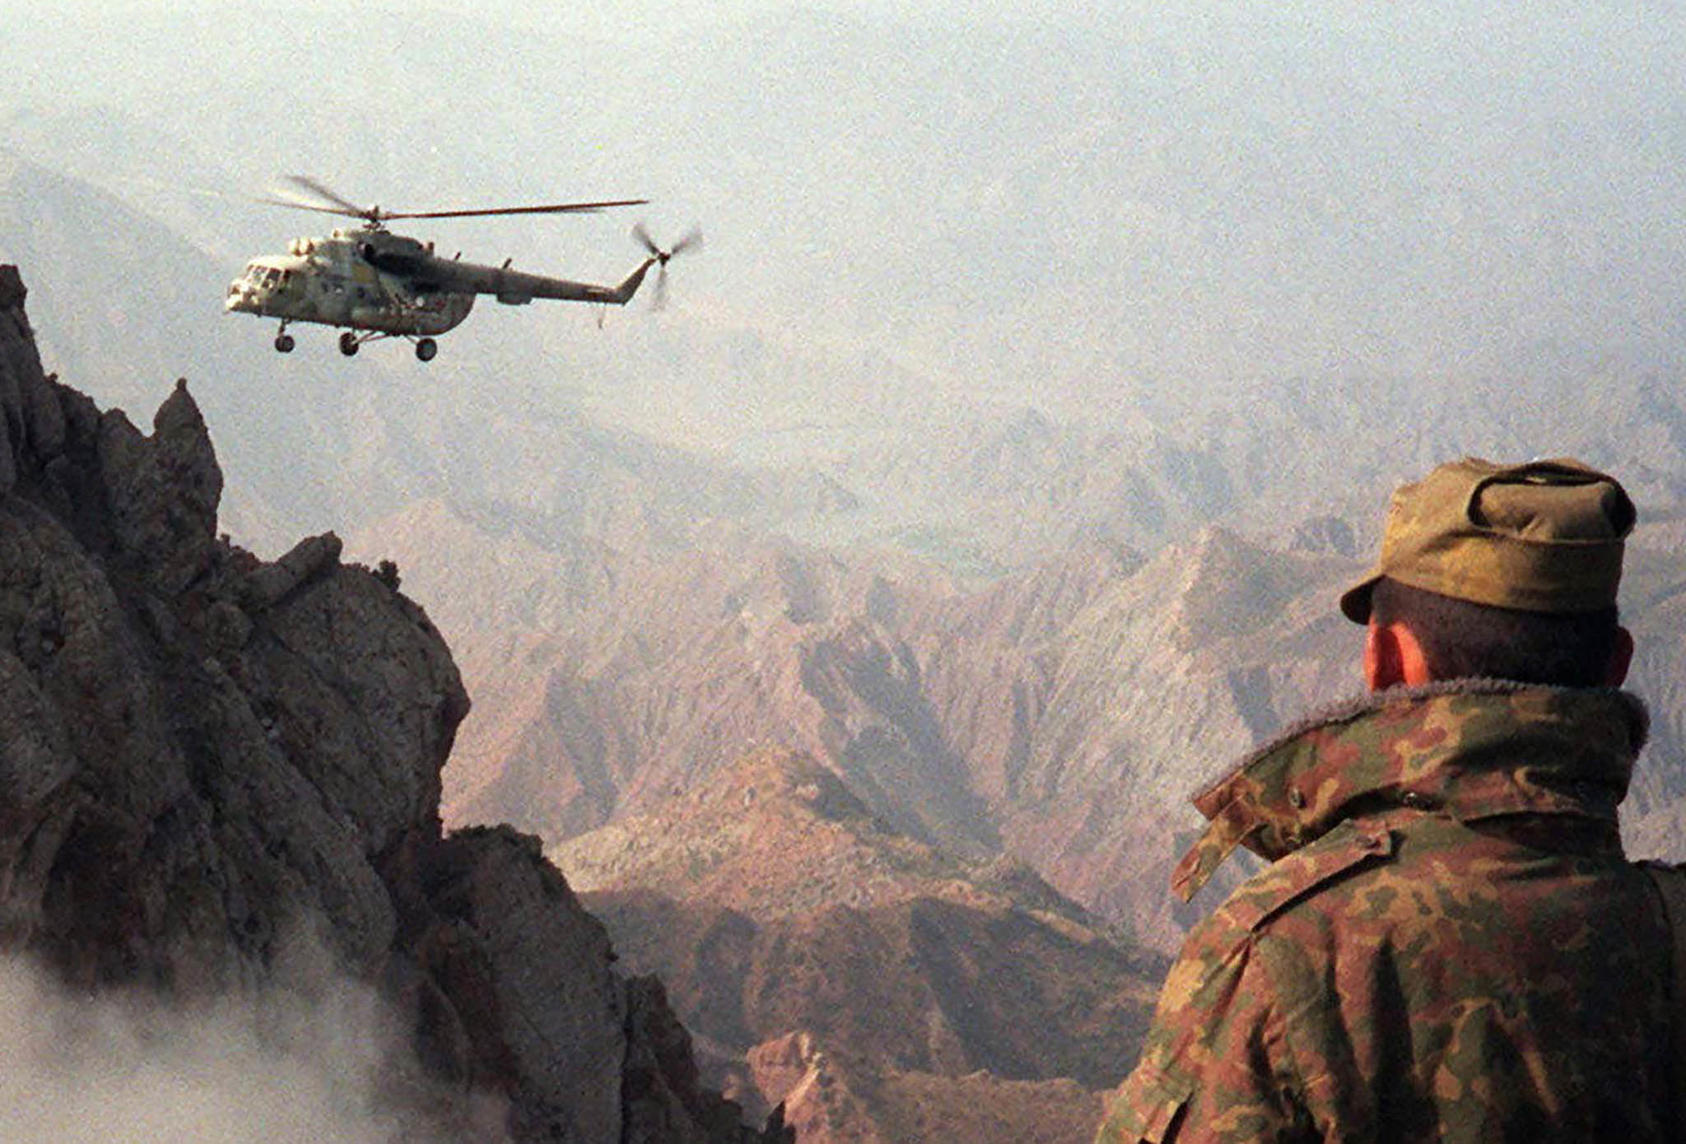 A helicopter brings supplies to Russian border guards during the Tajik civil war on August 1, 1996. (Photo by AP)